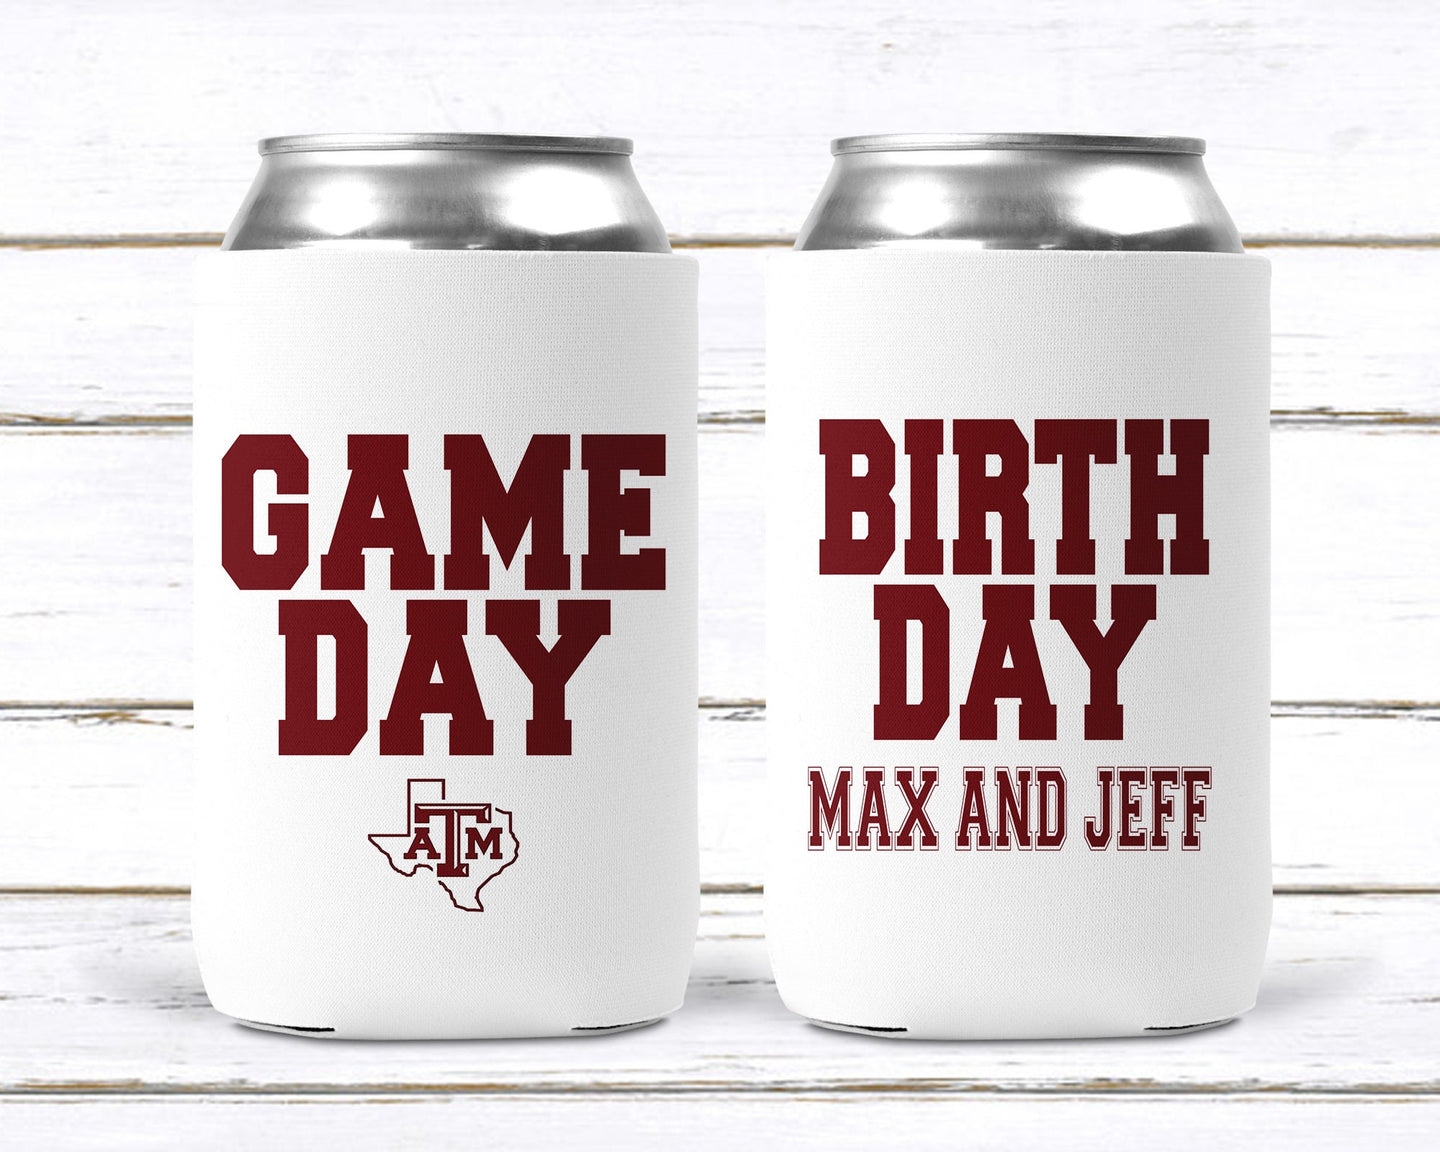 Game Day Huggers. Bachelor Party favors. Personalized Football Birthday Party. Custom Football Party Favors. Boys Birthday Party Favors.